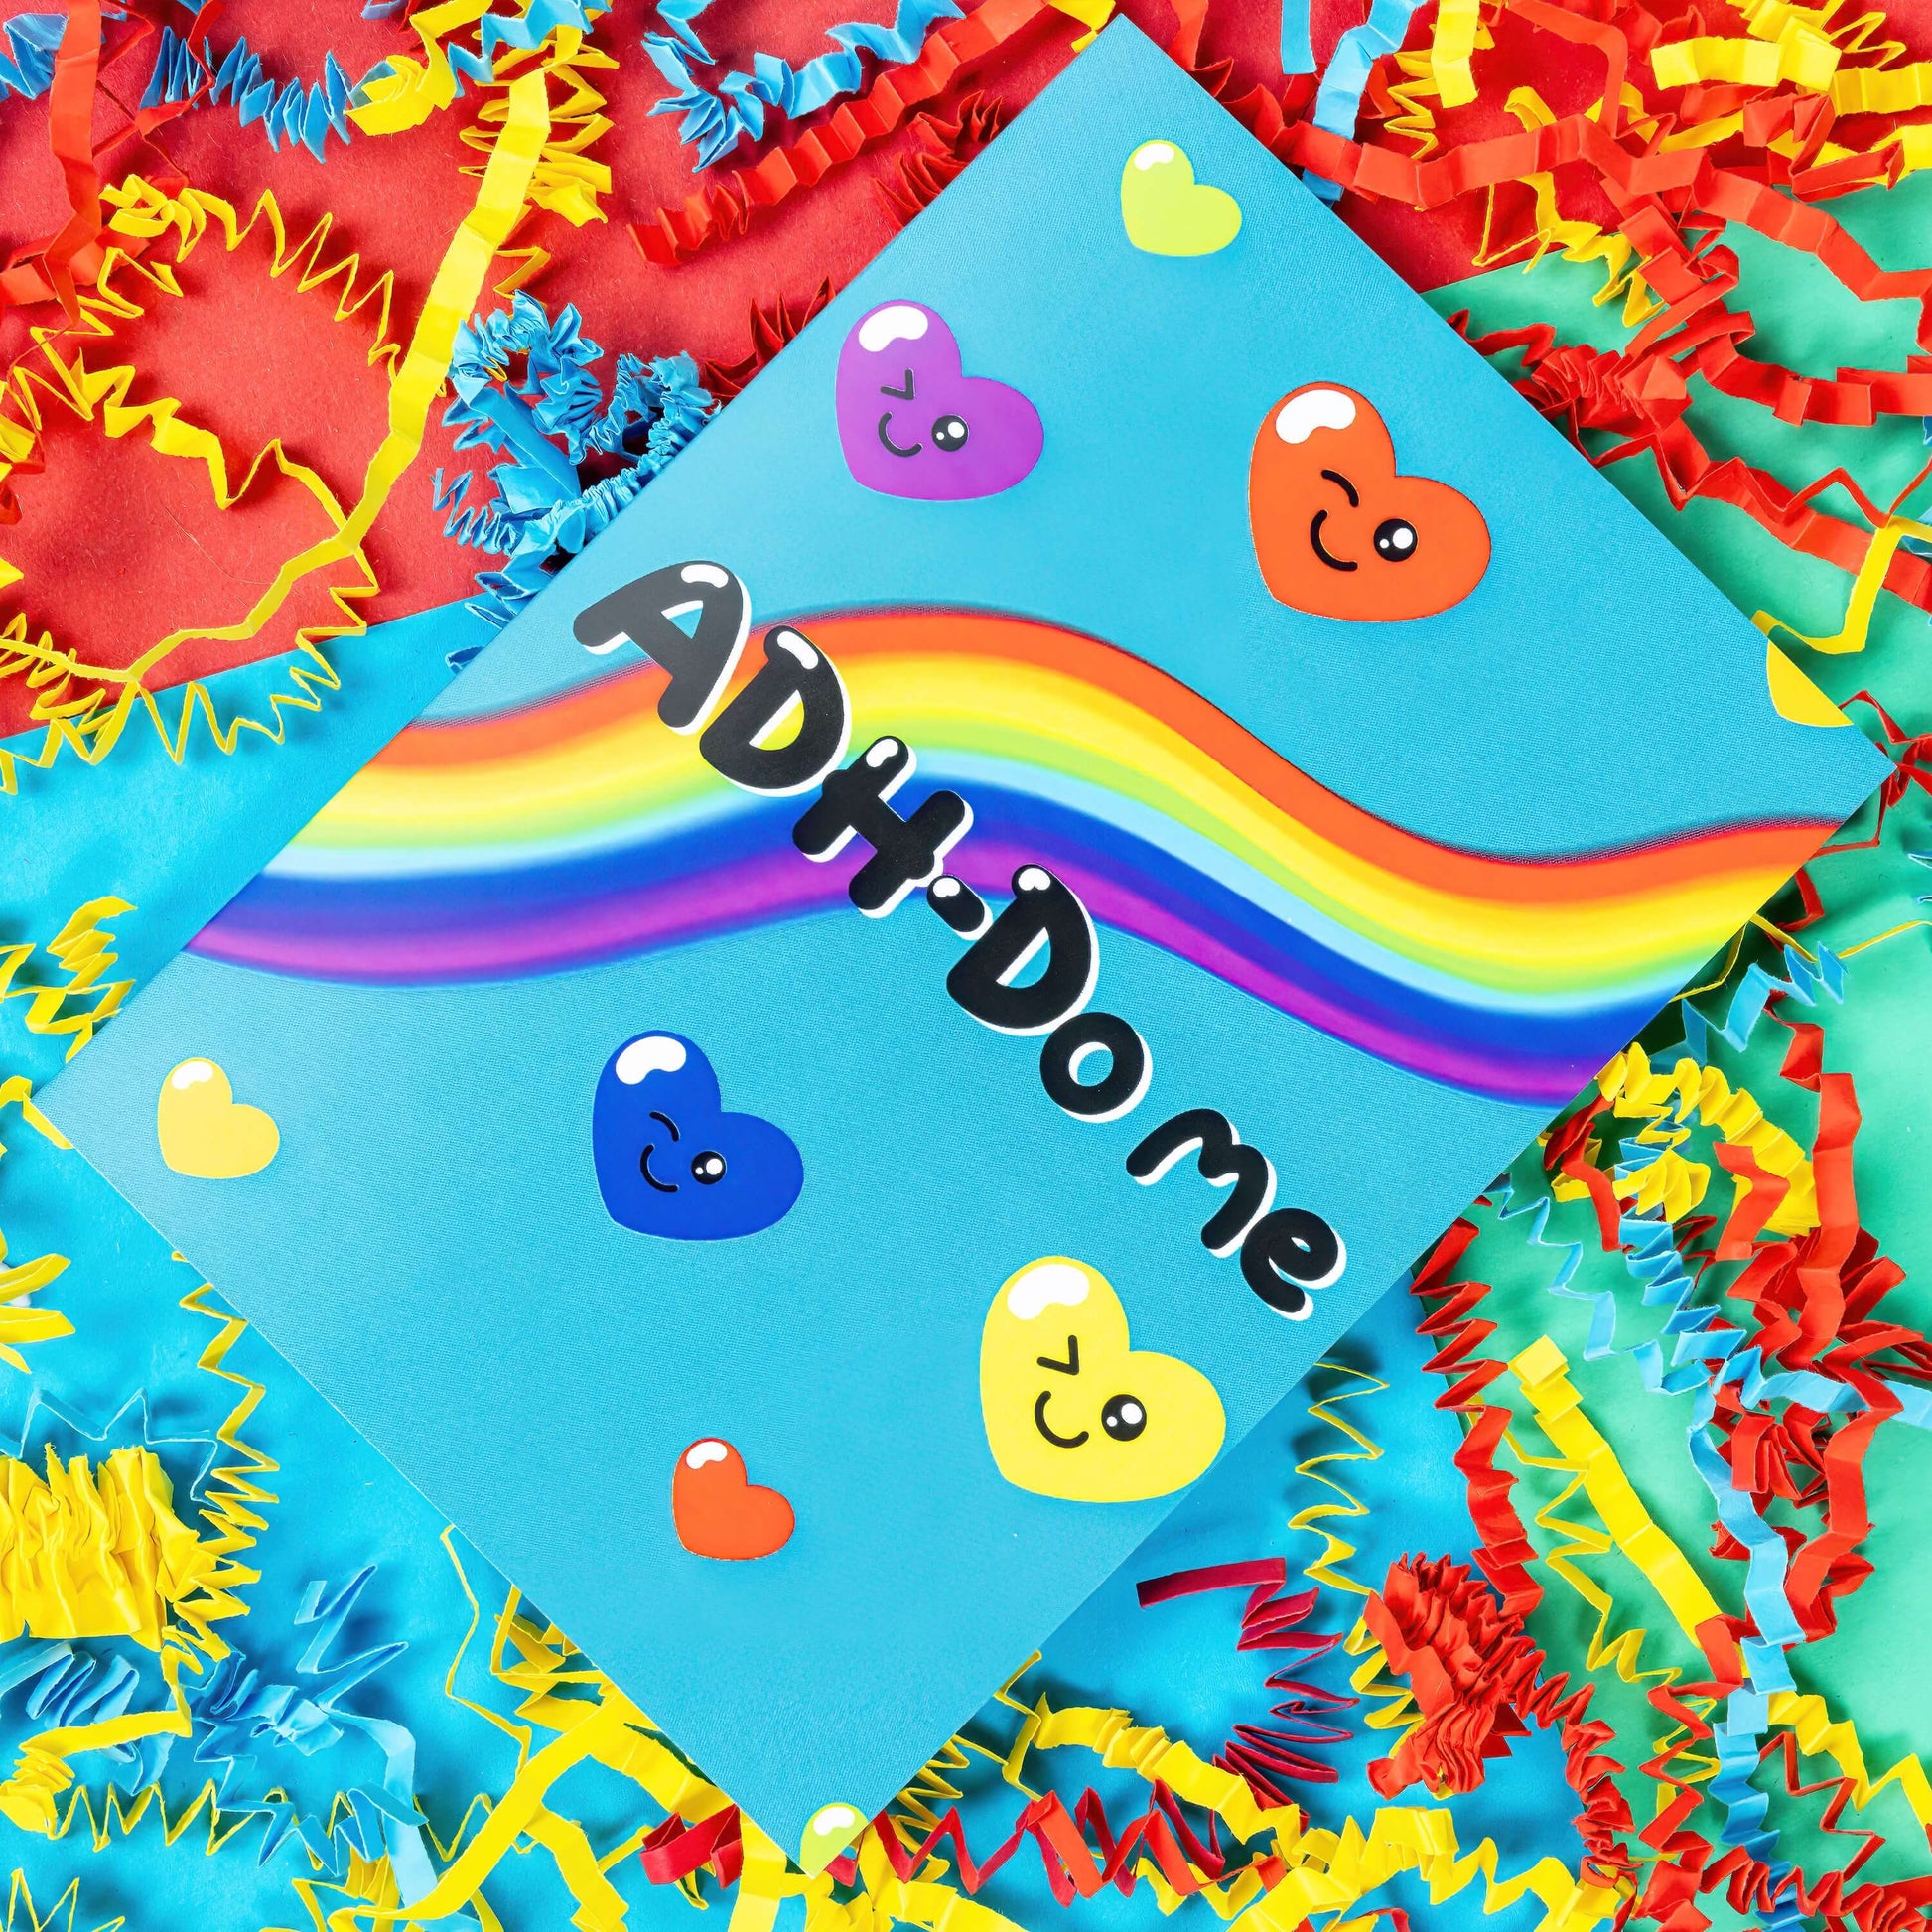 A sky blue greeting card with a rainbow going across it with different coloured love hearts with winky faces dotted around it. 'ADH-Do me' is written in big black letters across the card. The background of the photo is multi coloured card confetti. Inspired by neurodivergent disorders.